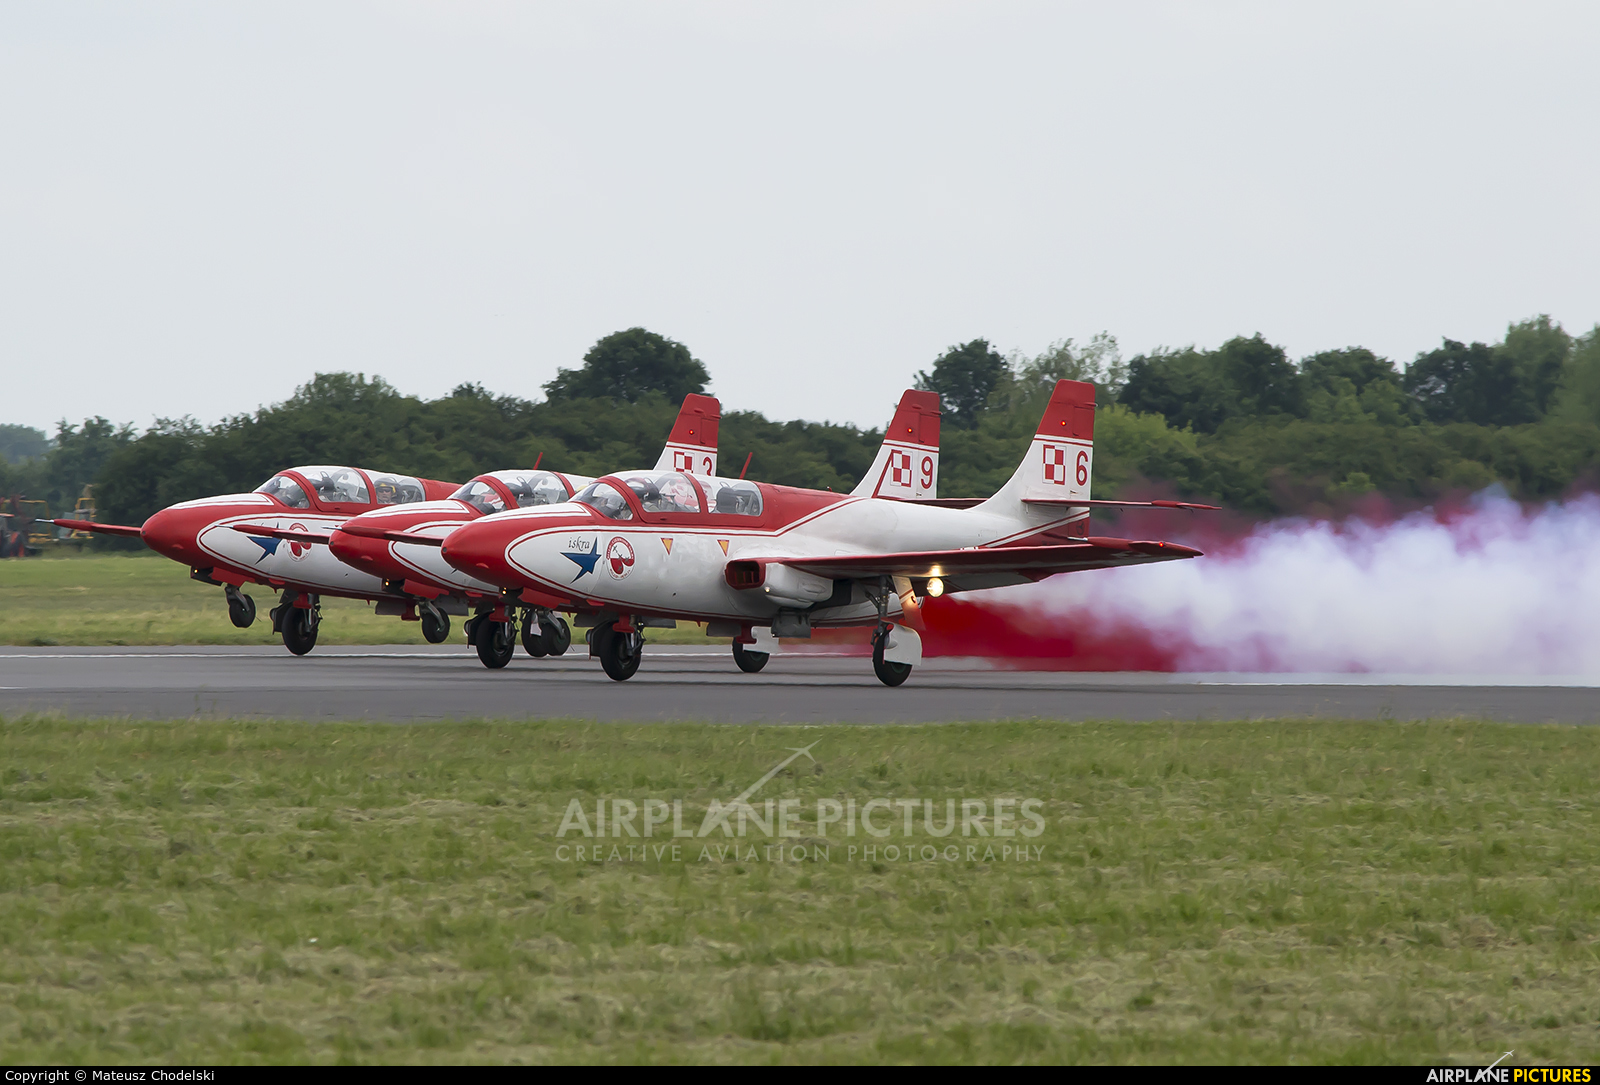 Poland - Air Force: White & Red Iskras 2006 aircraft at Dęblin